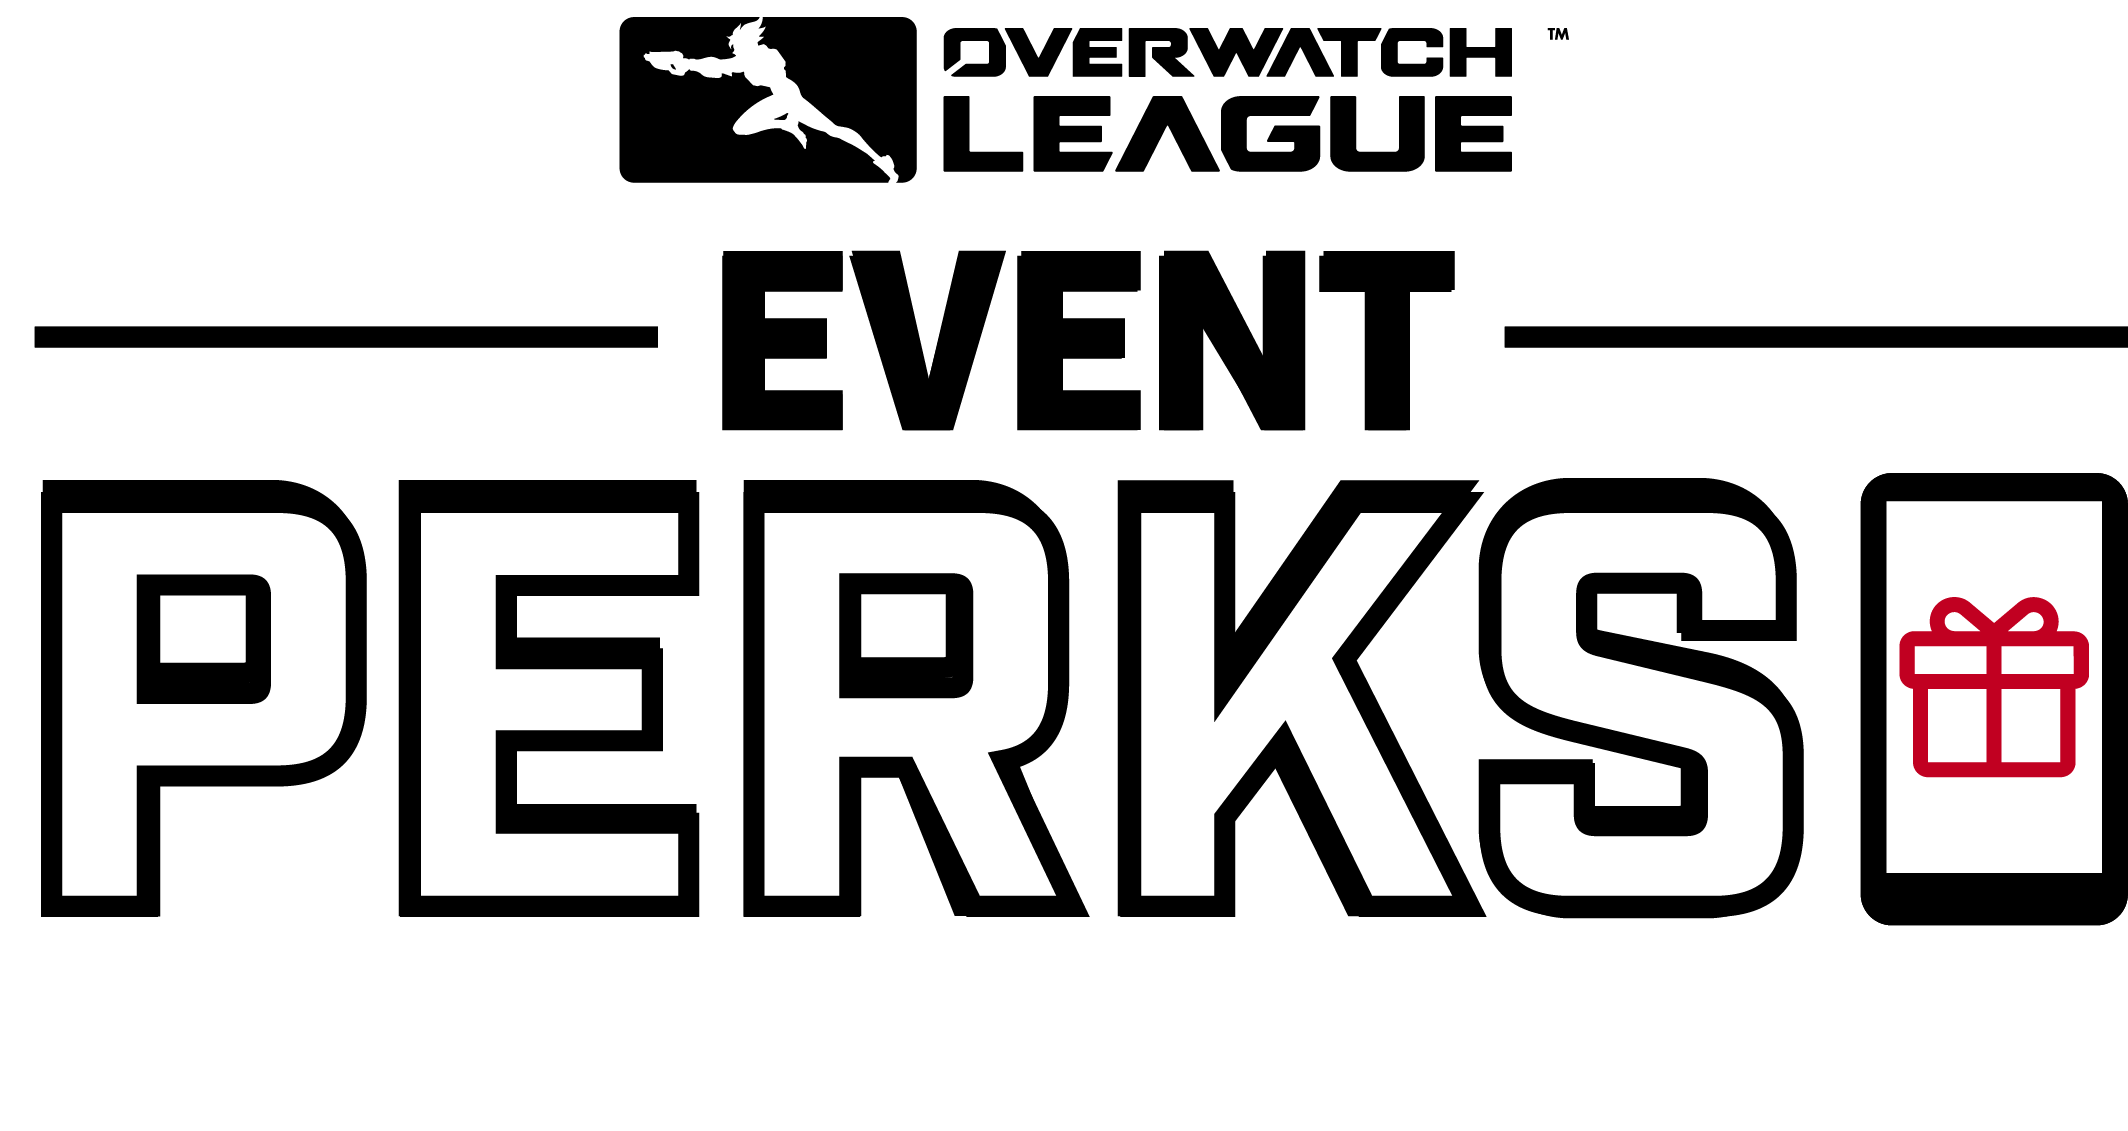 Home The Overwatch League